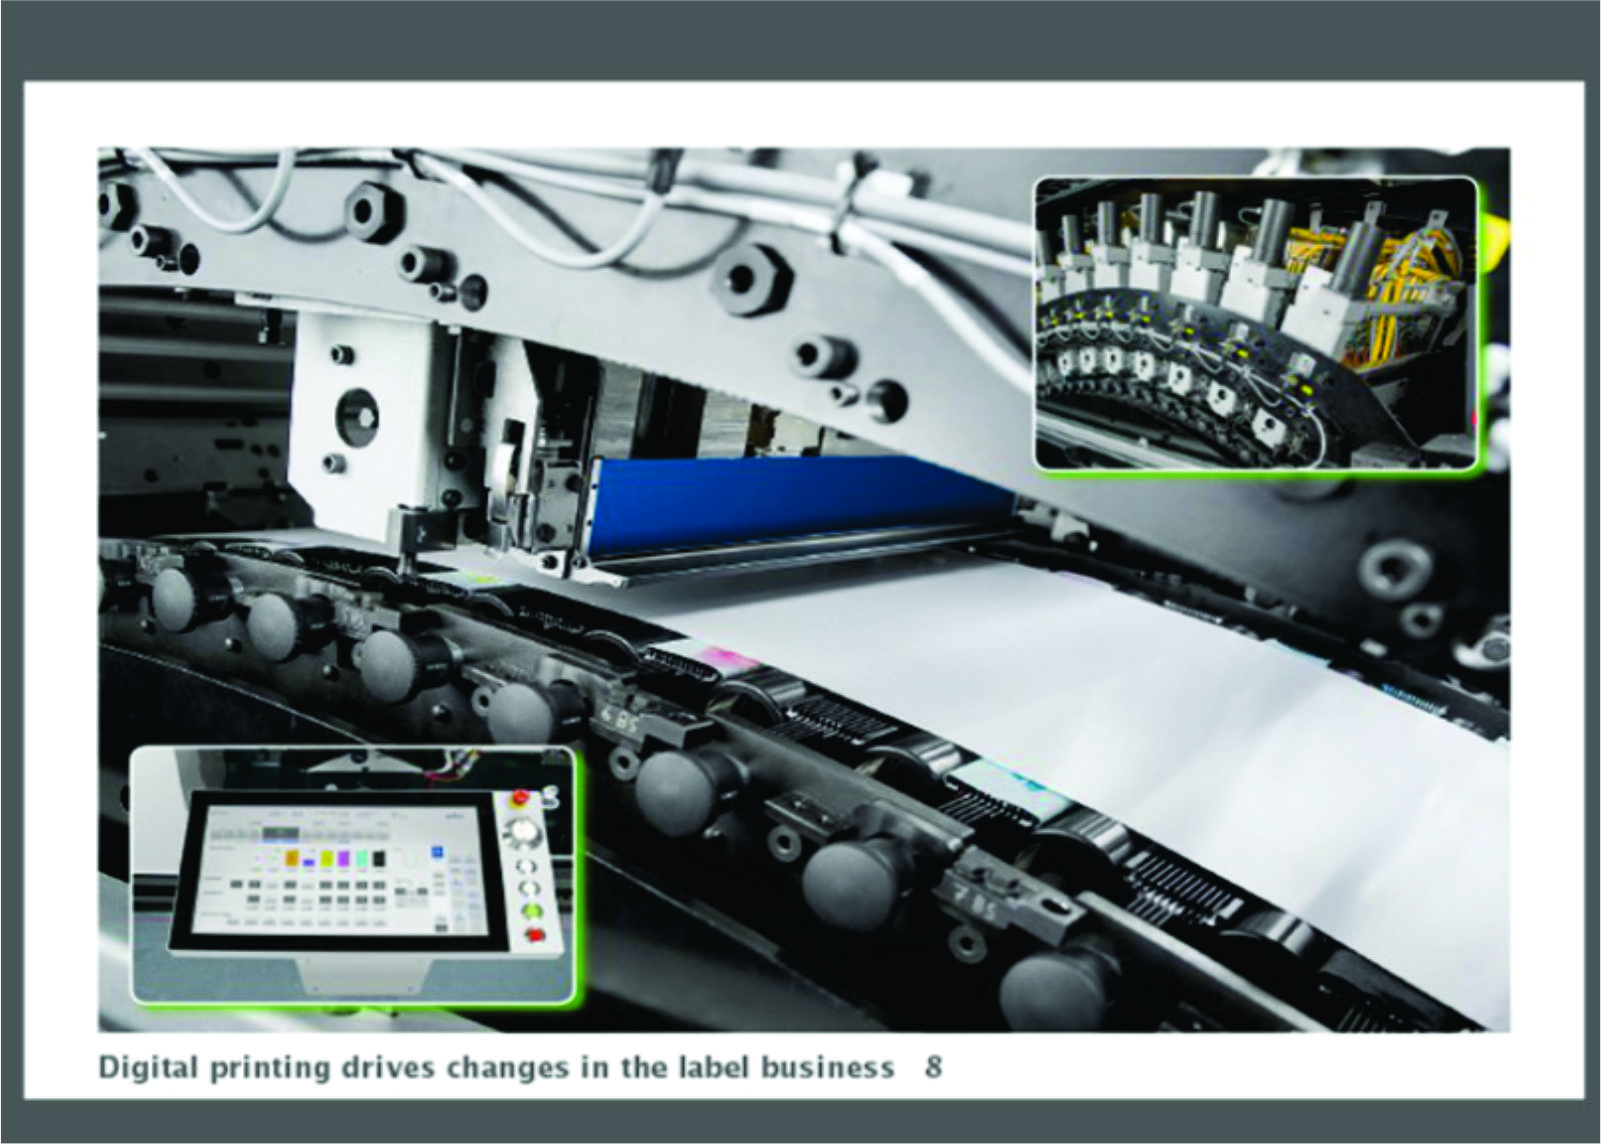 Digital Printing to Continue to Take Market Share from Offset Presses